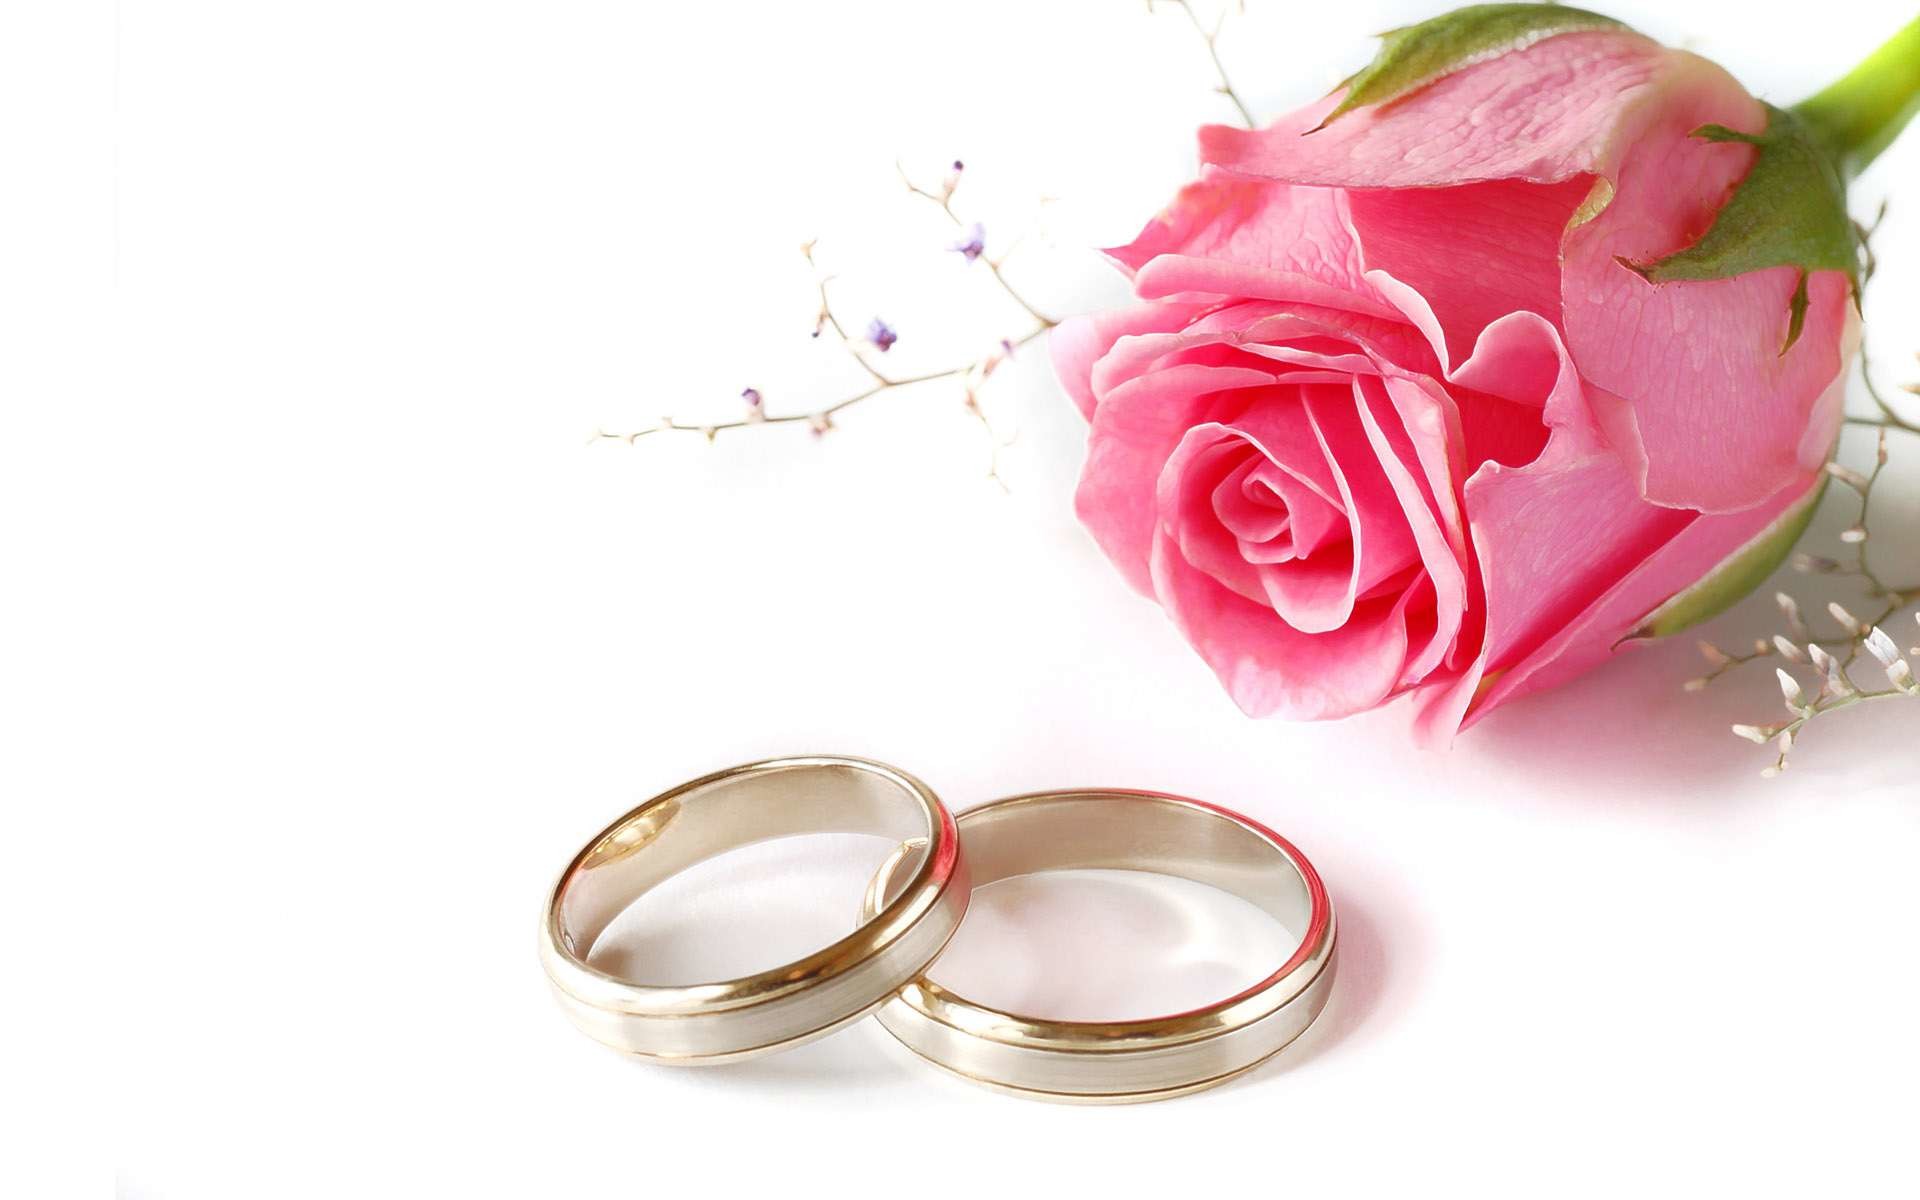 Significance of Wedding Rings at Christian Weddings | Feast Magazine